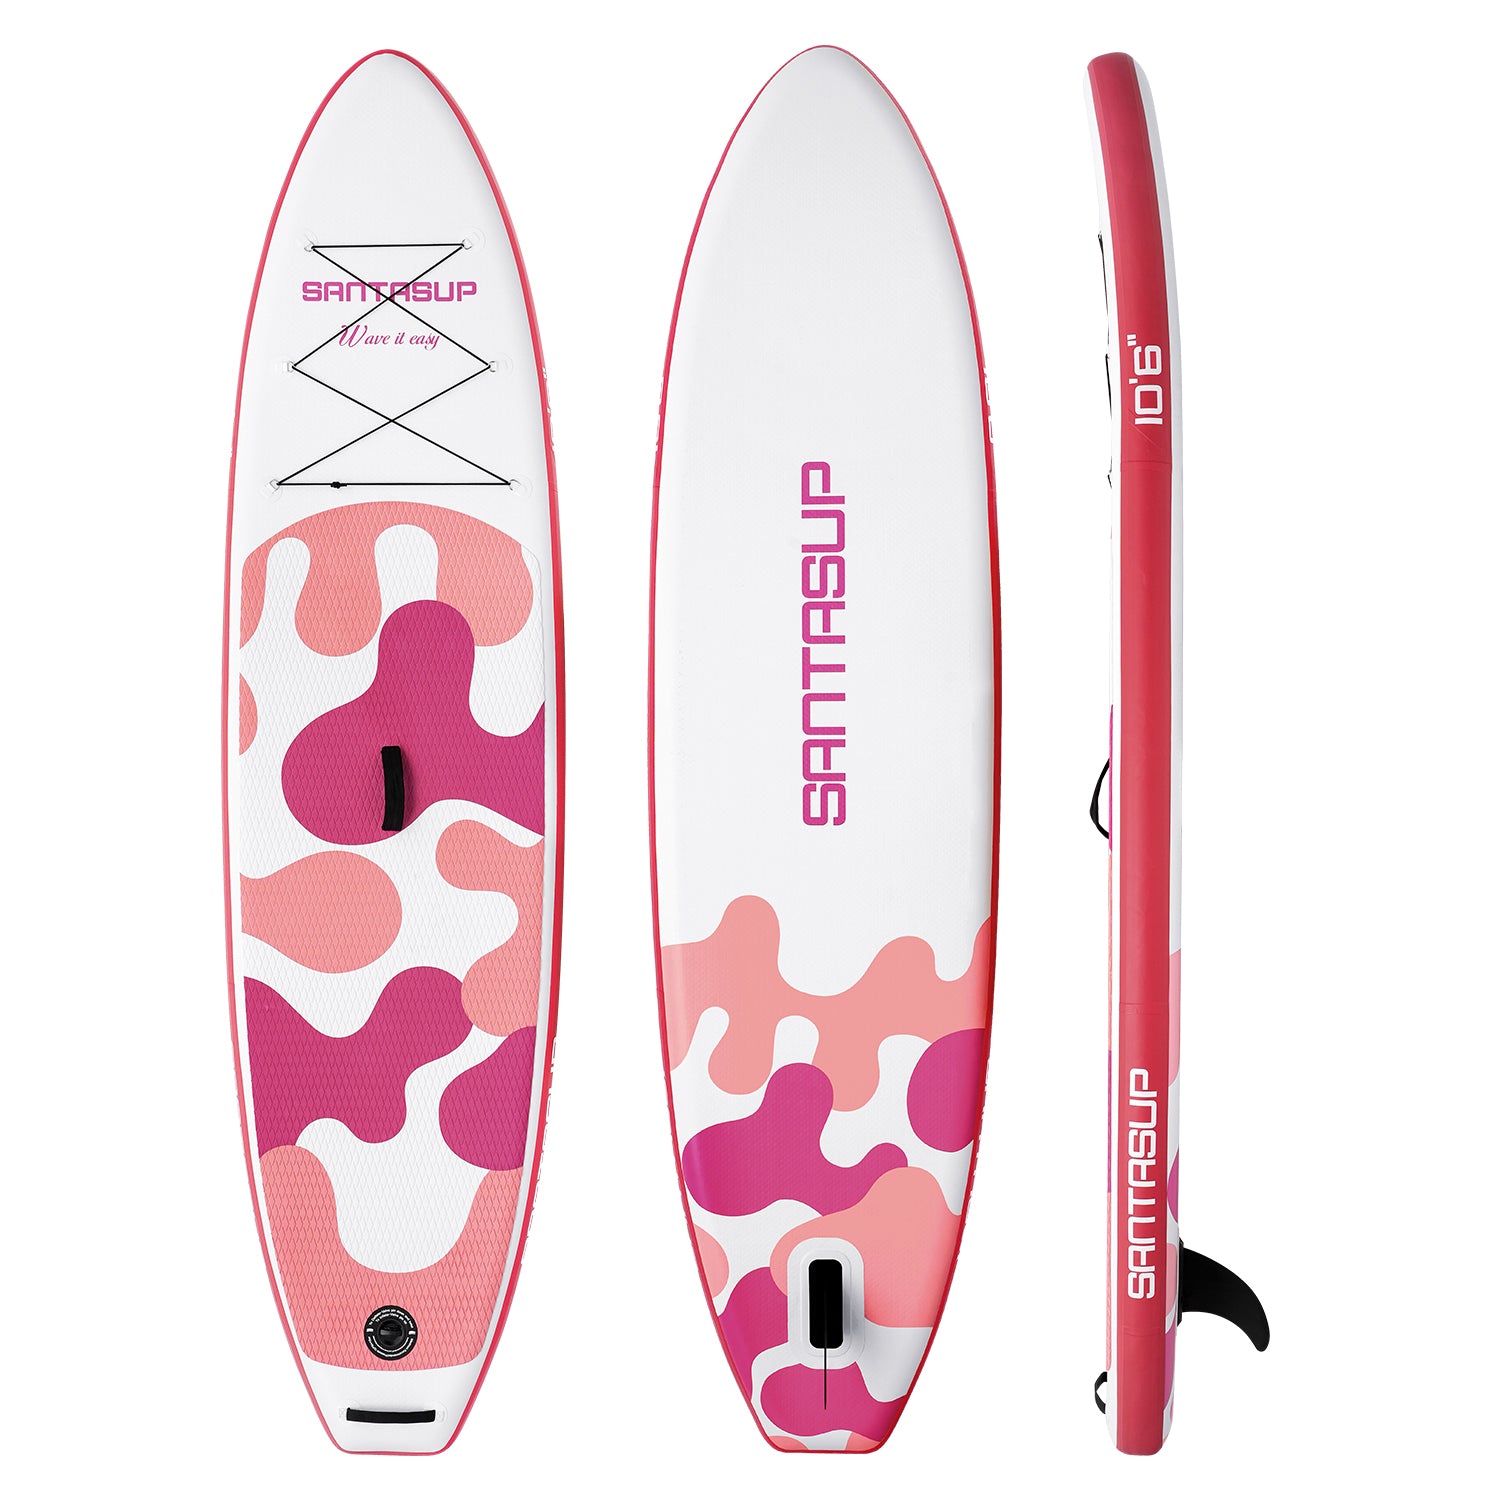 Santasup Inflatable Stand Up Paddle Board With Premium Sup Accessories